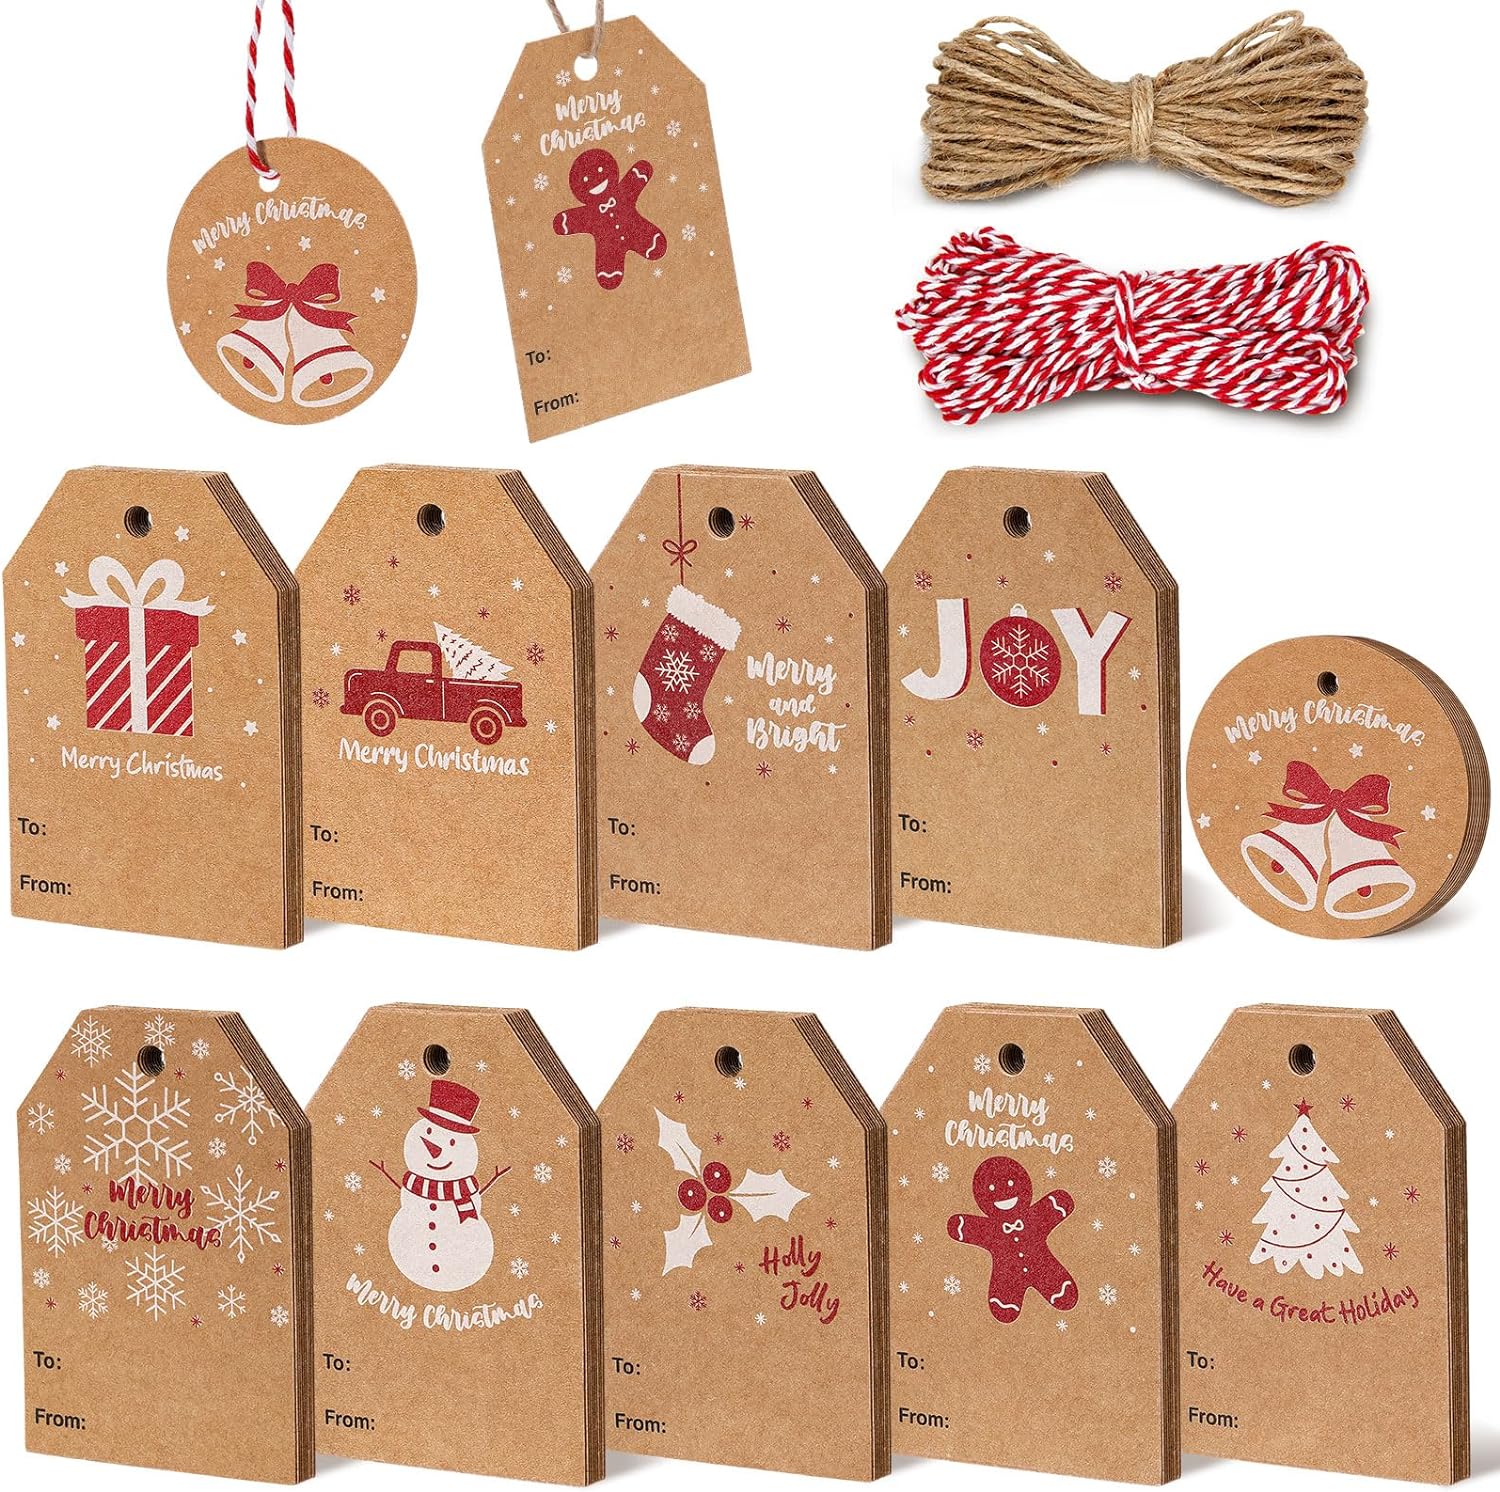 Blisstime 100PCS Christmas Gift Tags with String Twine for Gift Wrapping, Brown Kraft Gift Tags for Christmas Presents, Snowflake Snowman Holiday Gift Tags Christmas